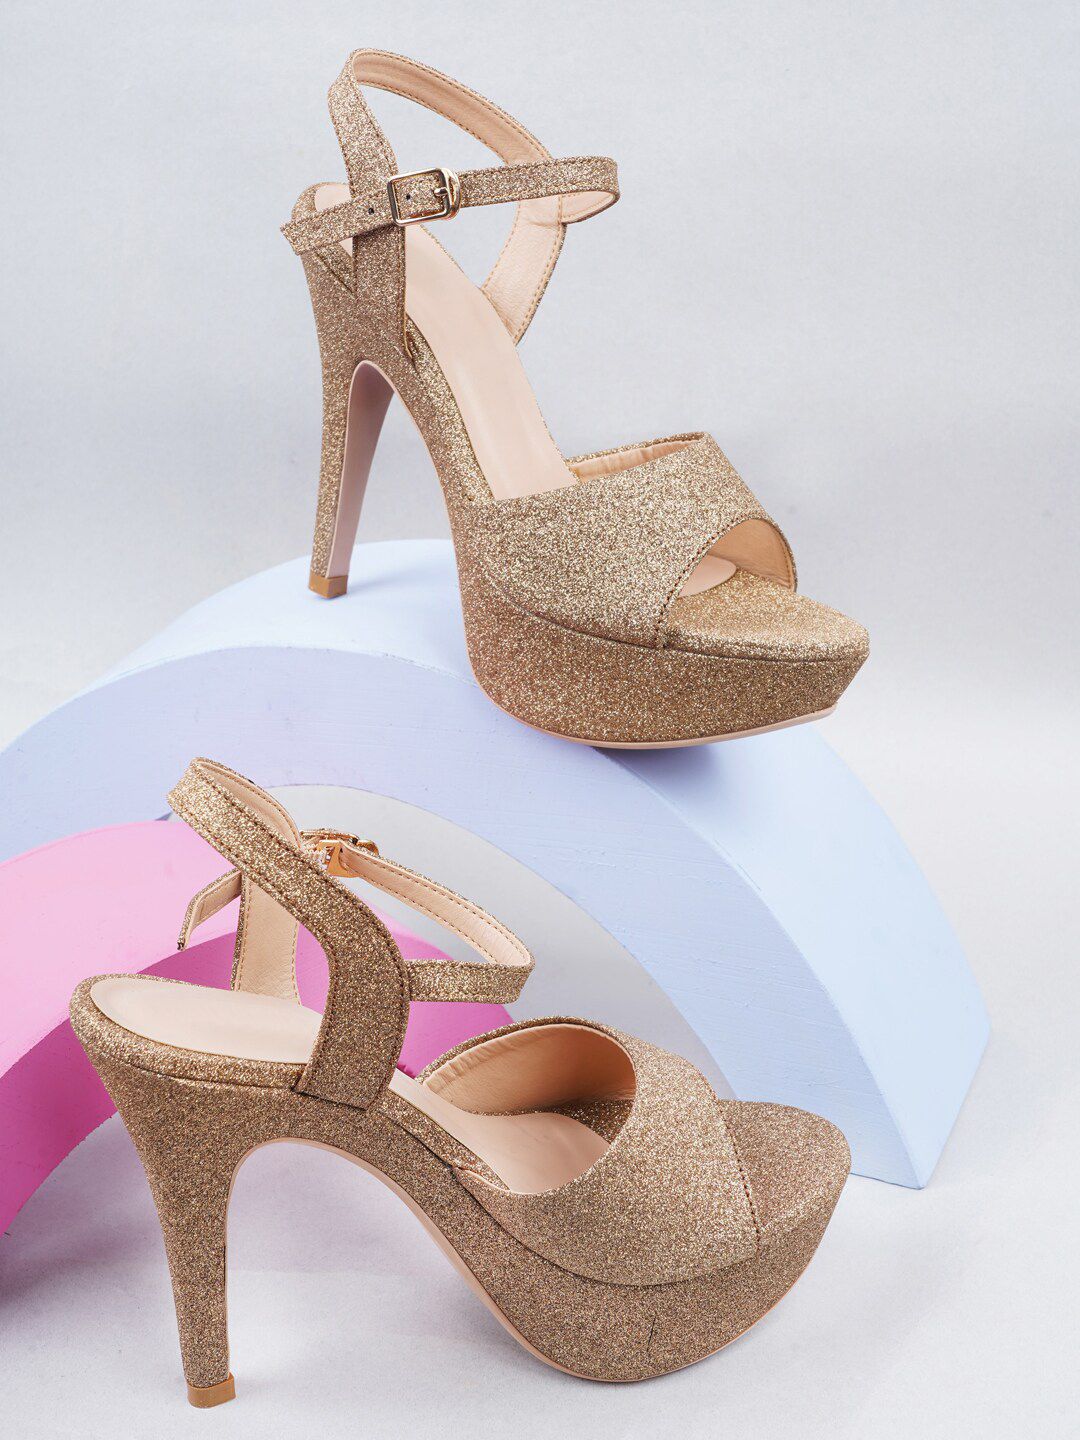 Rubeezz Copper-Toned Textured Party Stiletto Sandals Price in India